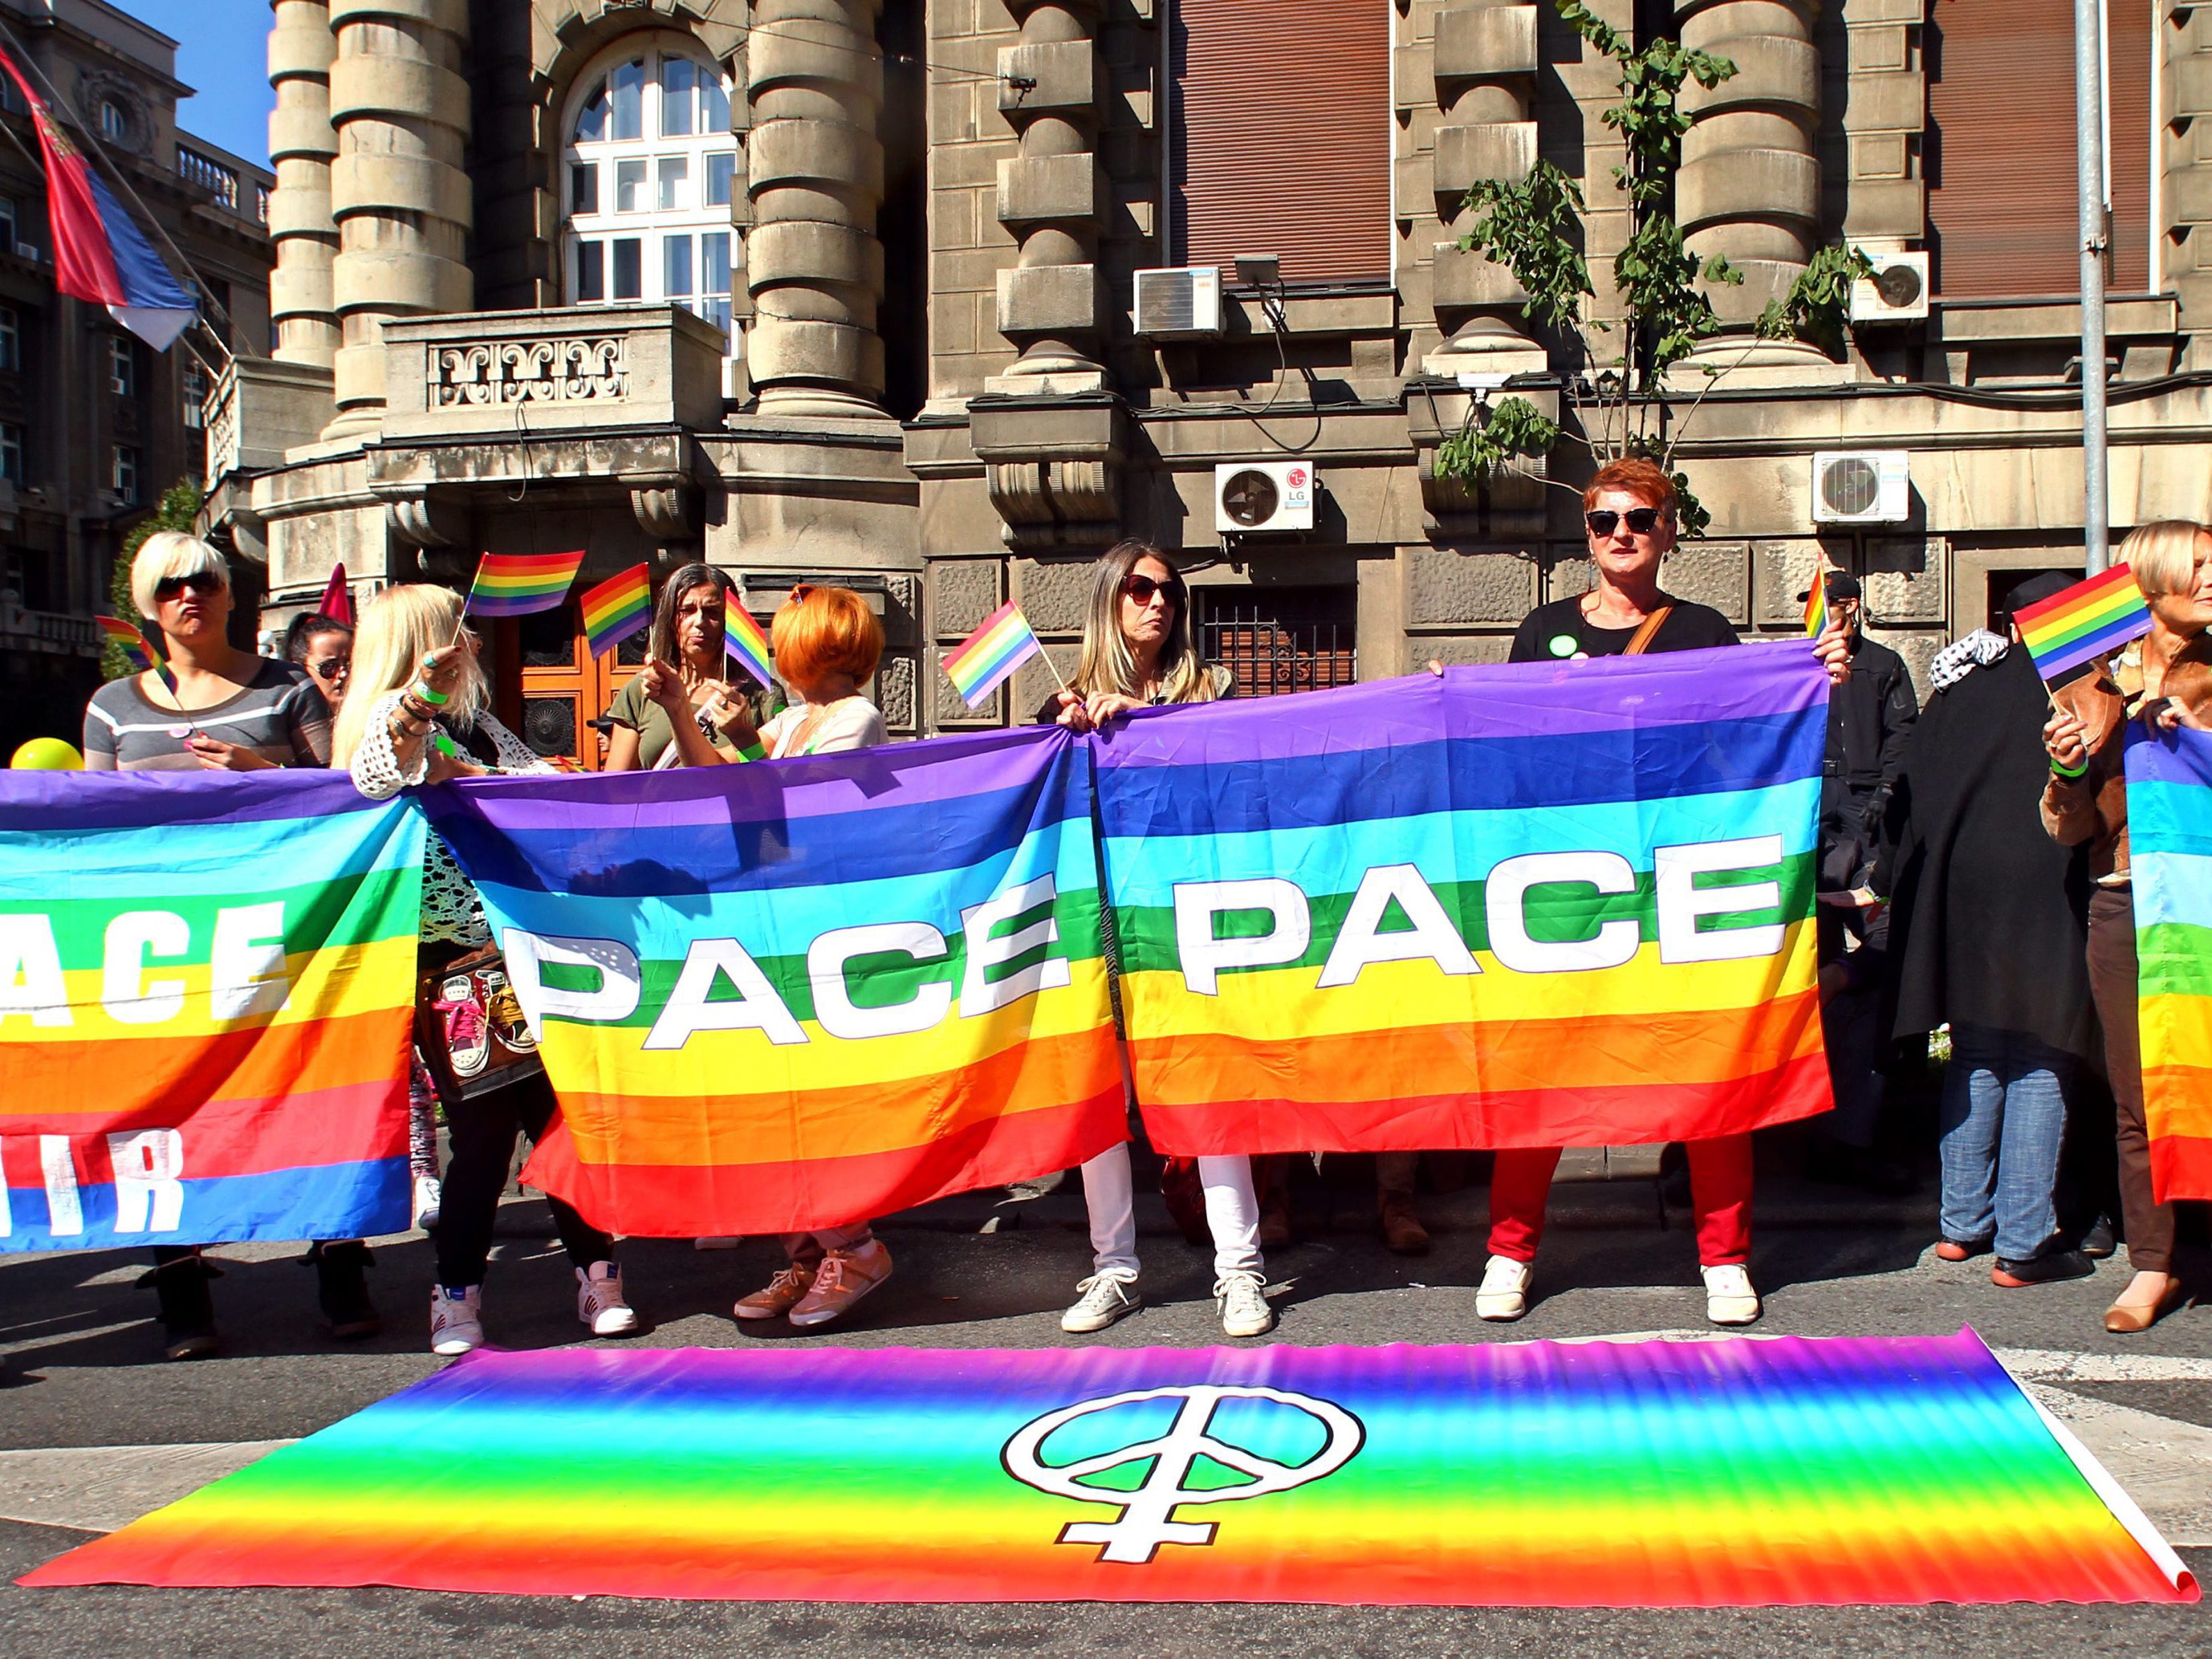 Serbia has held its first Gay Pride march in four years